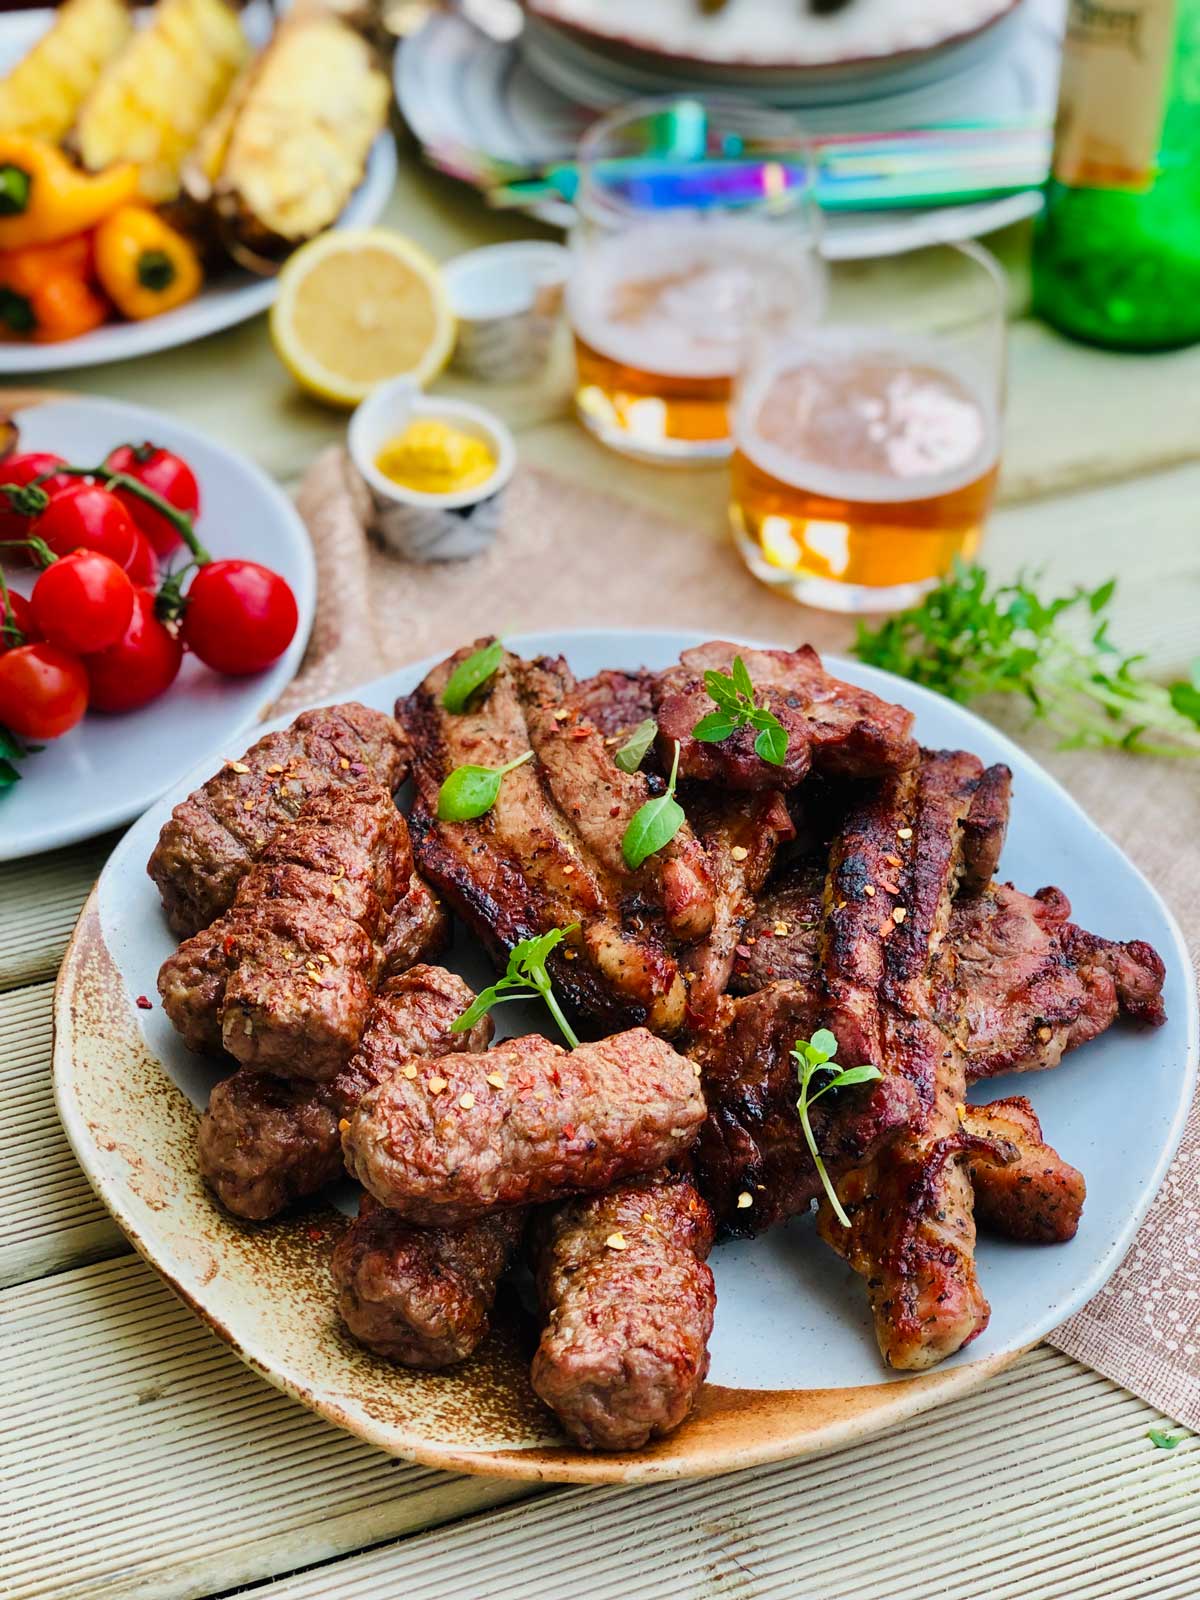 Romanian foods, Traditional food in Romania, What to eat in Romania, Mici, Grilled meat rolls, Romanian Food, Romanian cuisine, Traditional Romanian Food, food in Romania, Romanian dishes